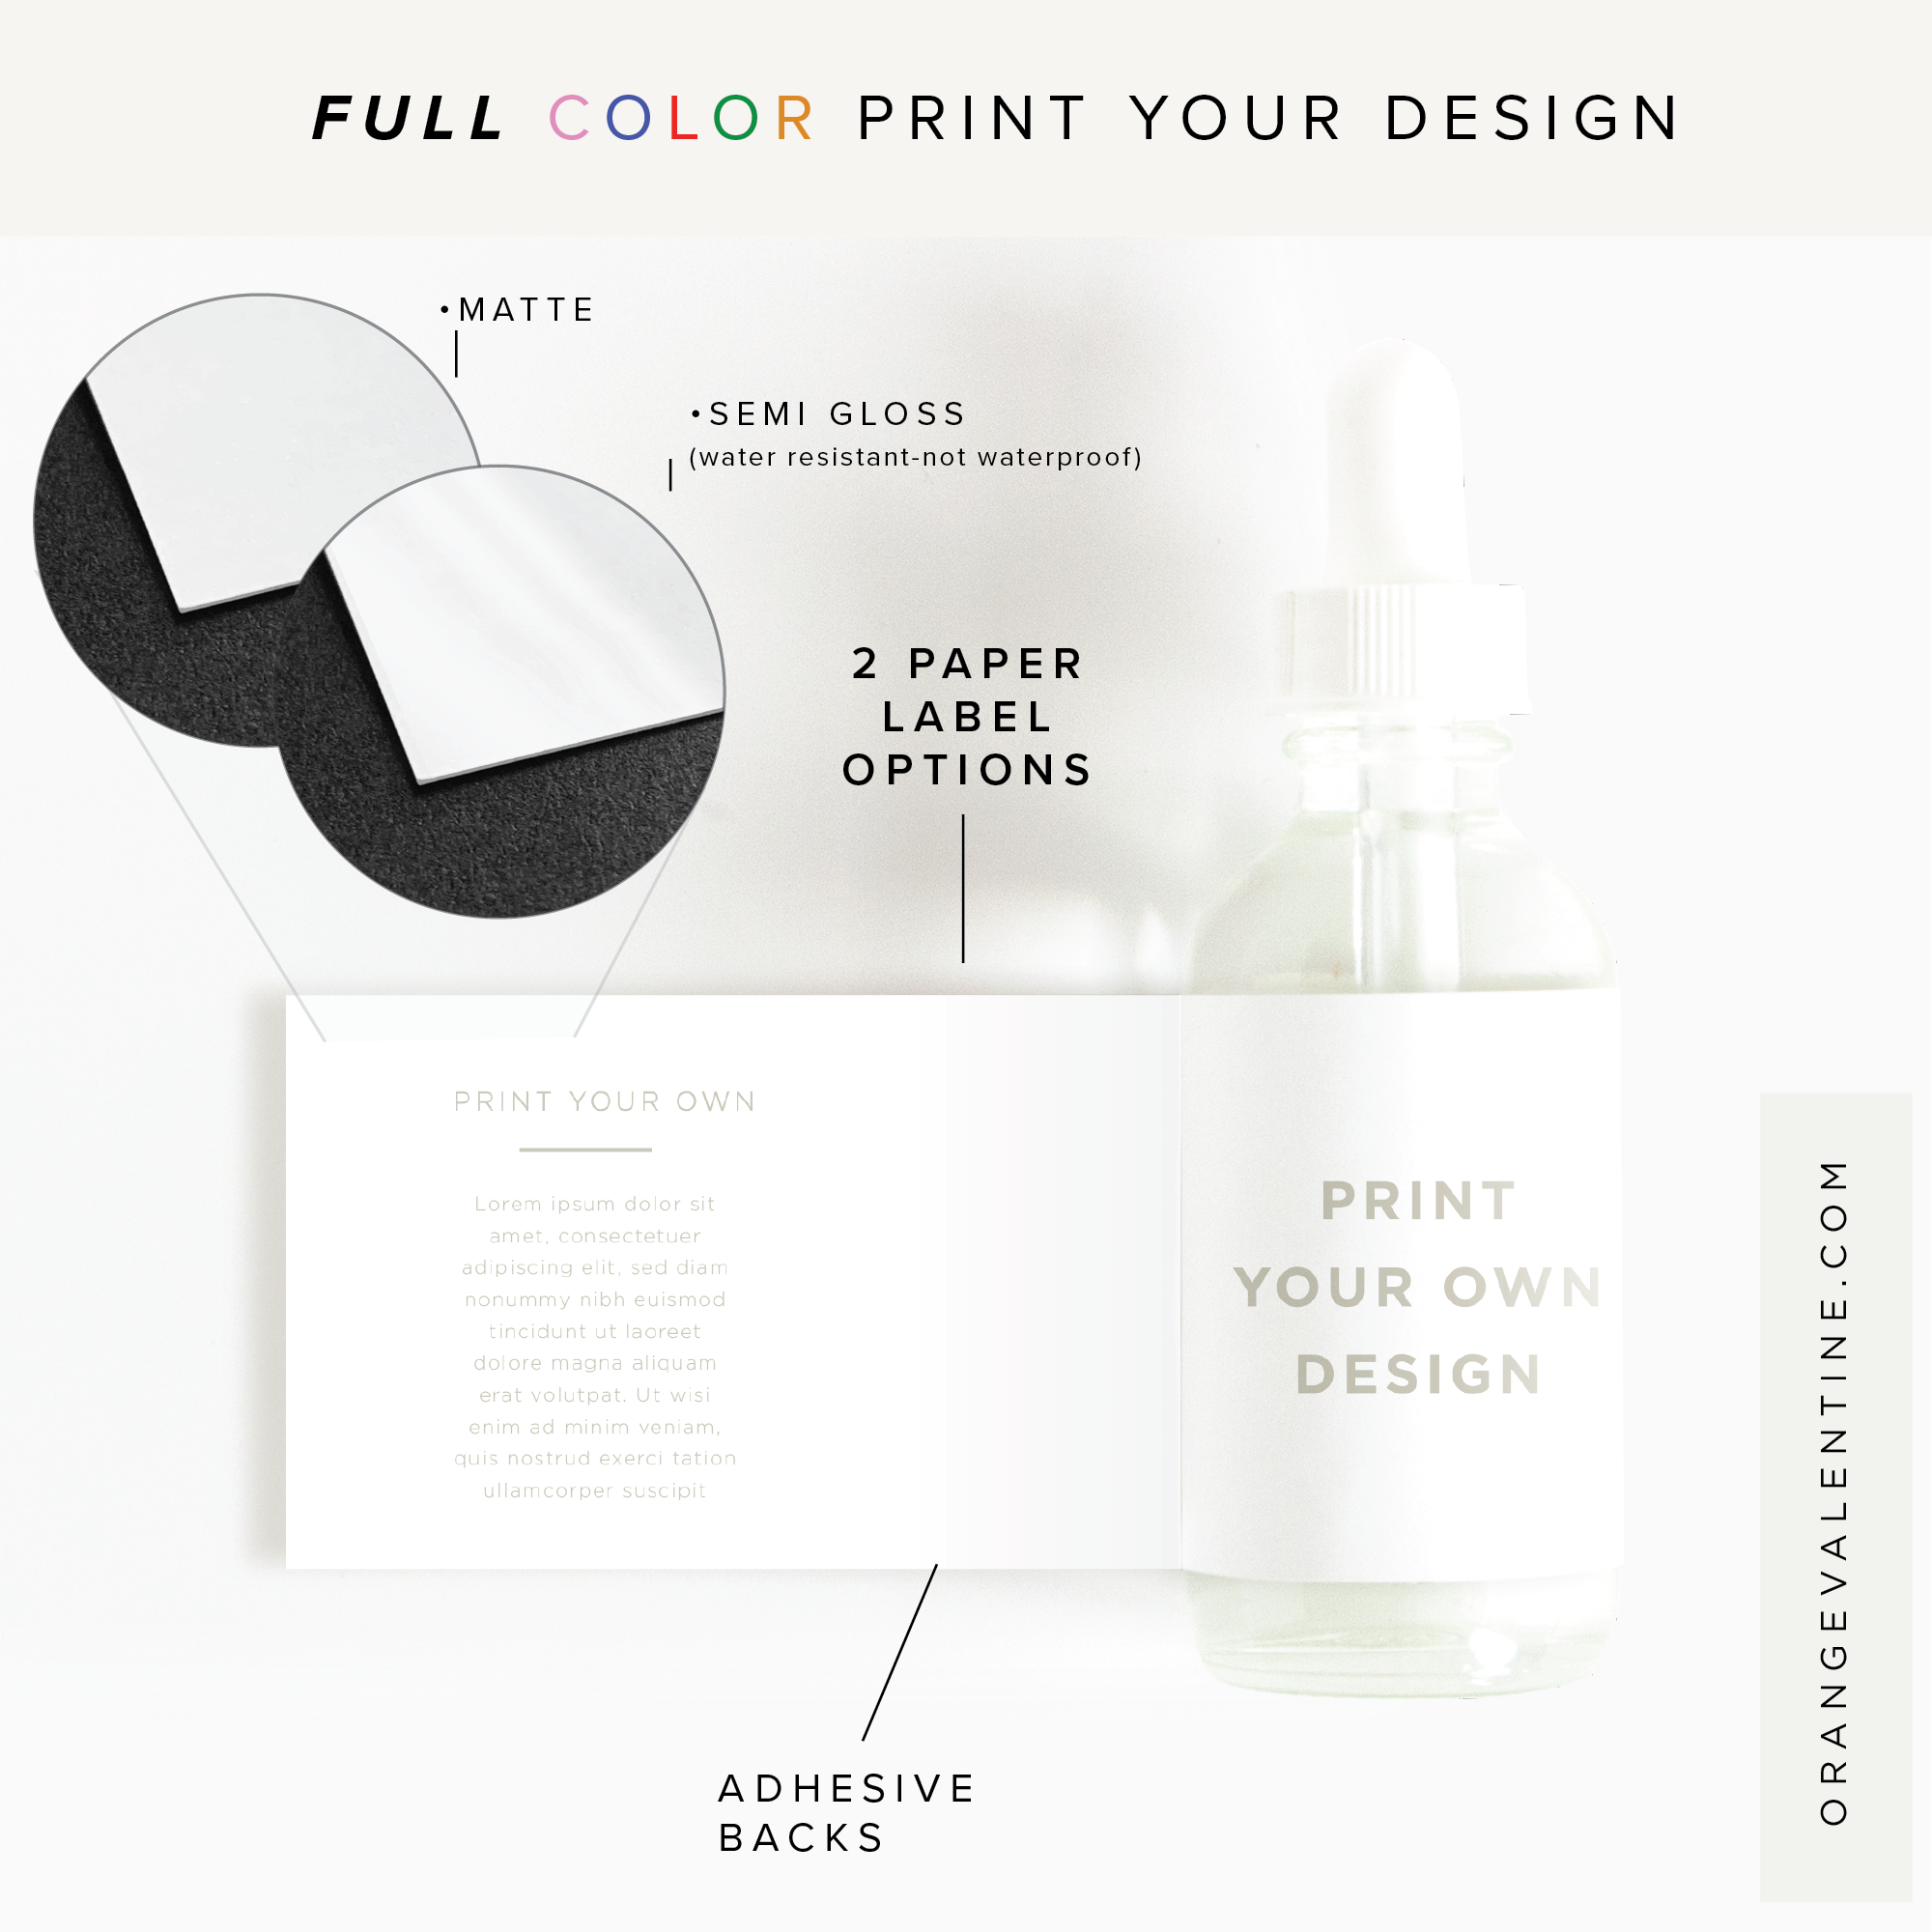 Print Your Own Wrap Product Label